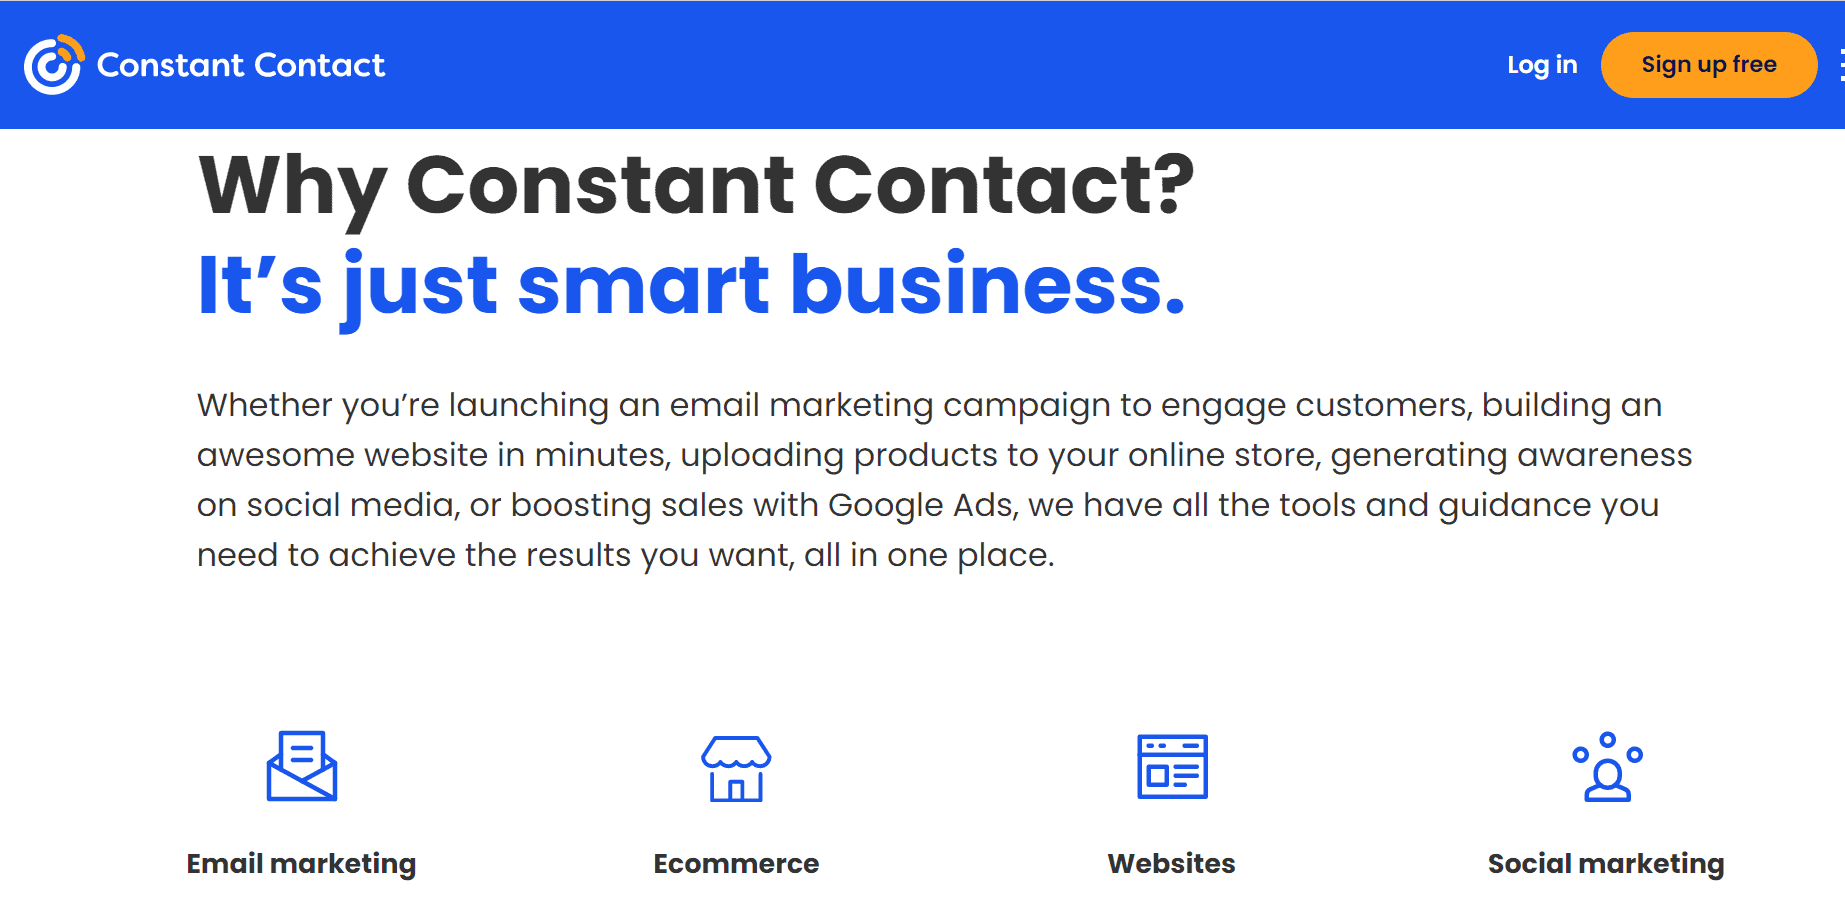 Services offered by Constant Contact